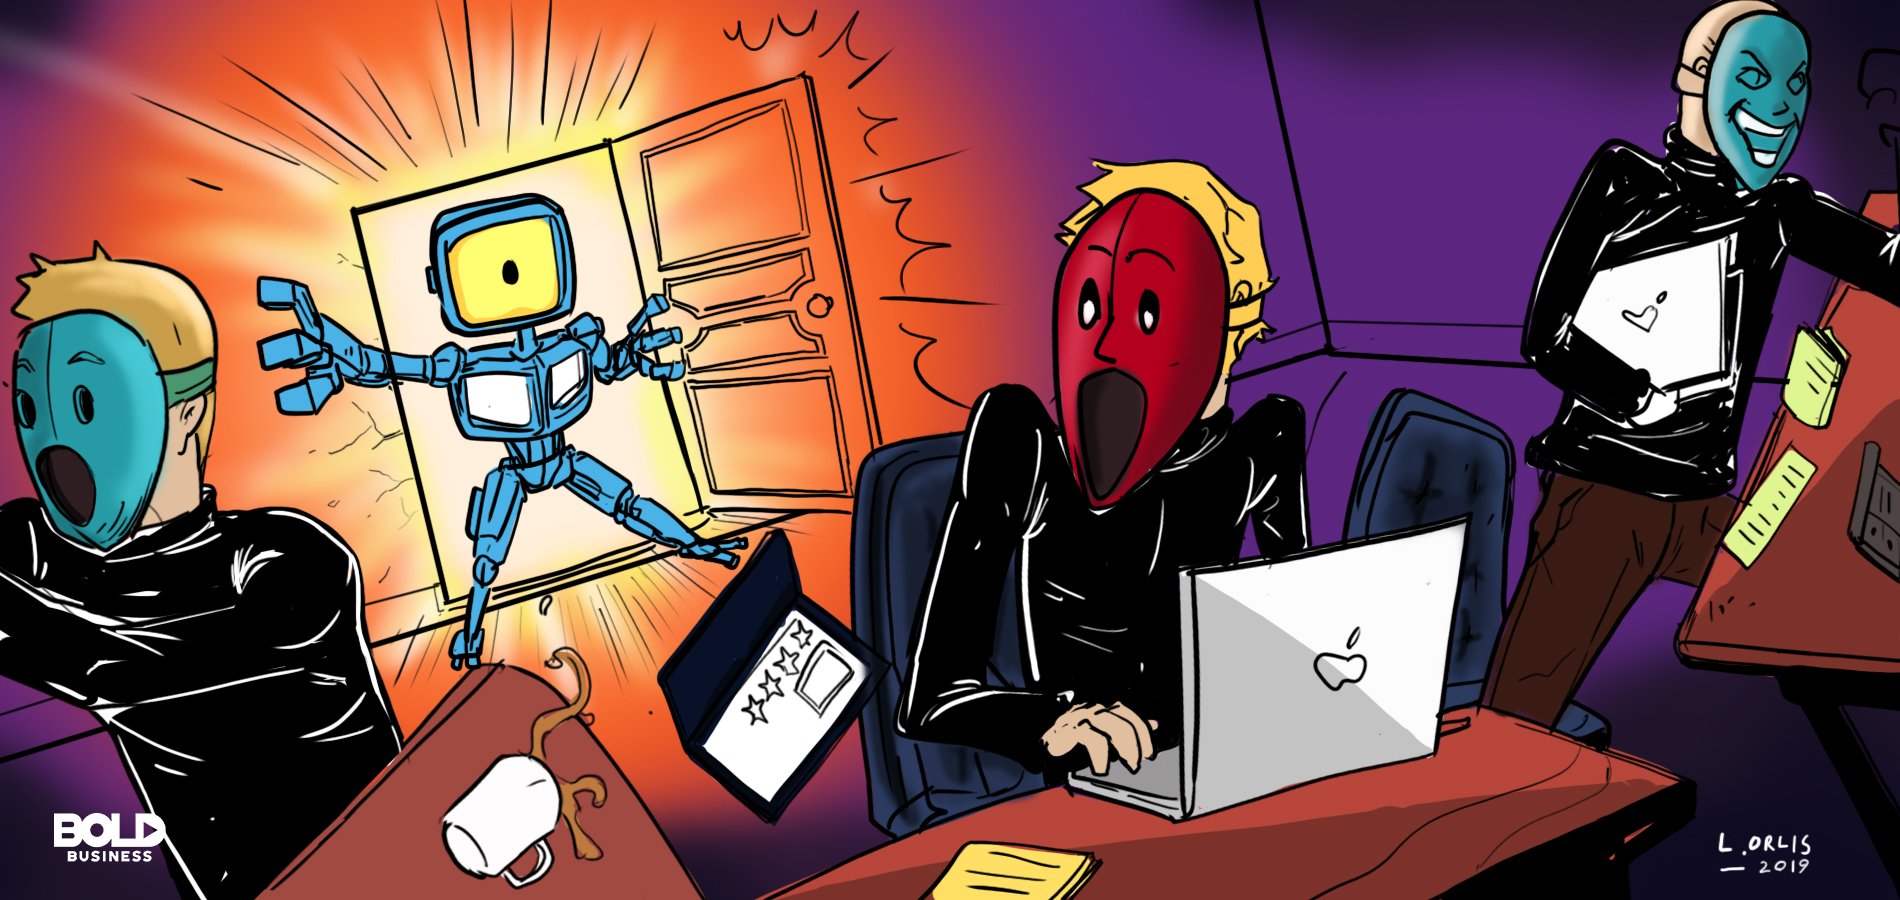 cartoon of masked men making online fake reviews in a dark room and an AI Technology robot busting in on them